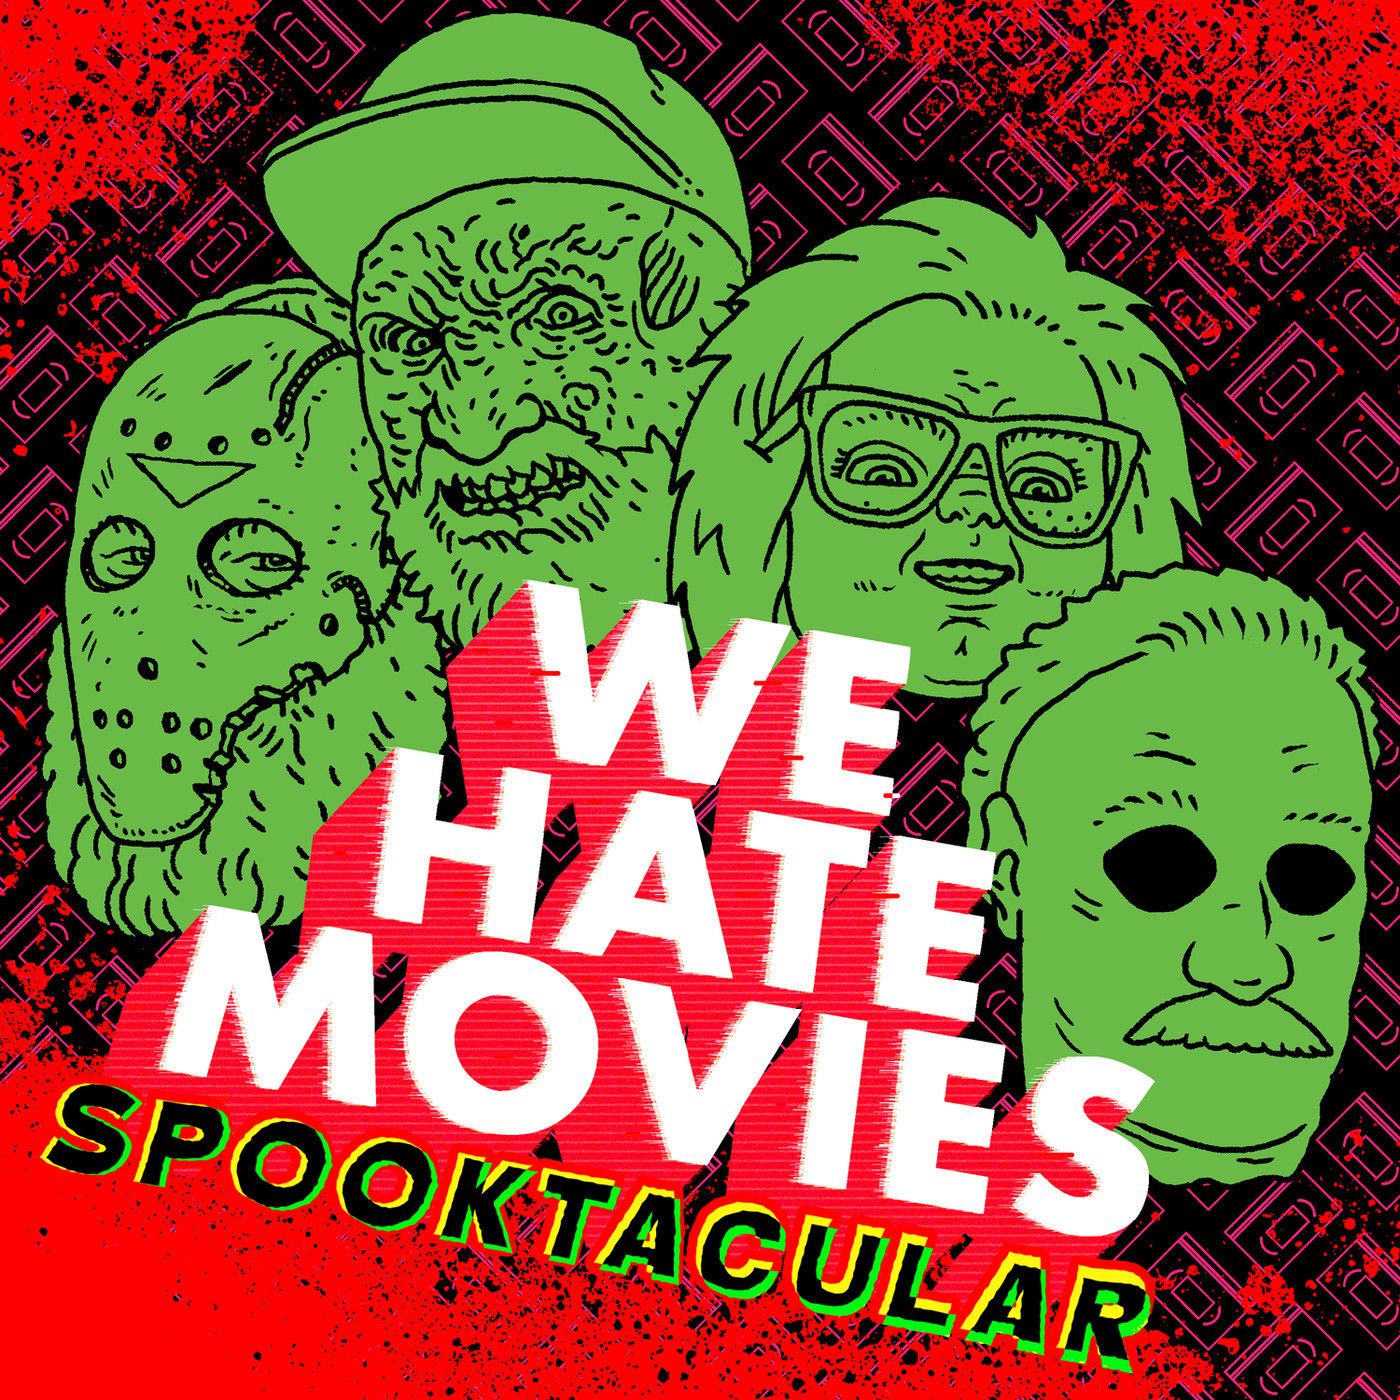 We Hate Movies / Episode 446 - The Shining (PREVIEW)